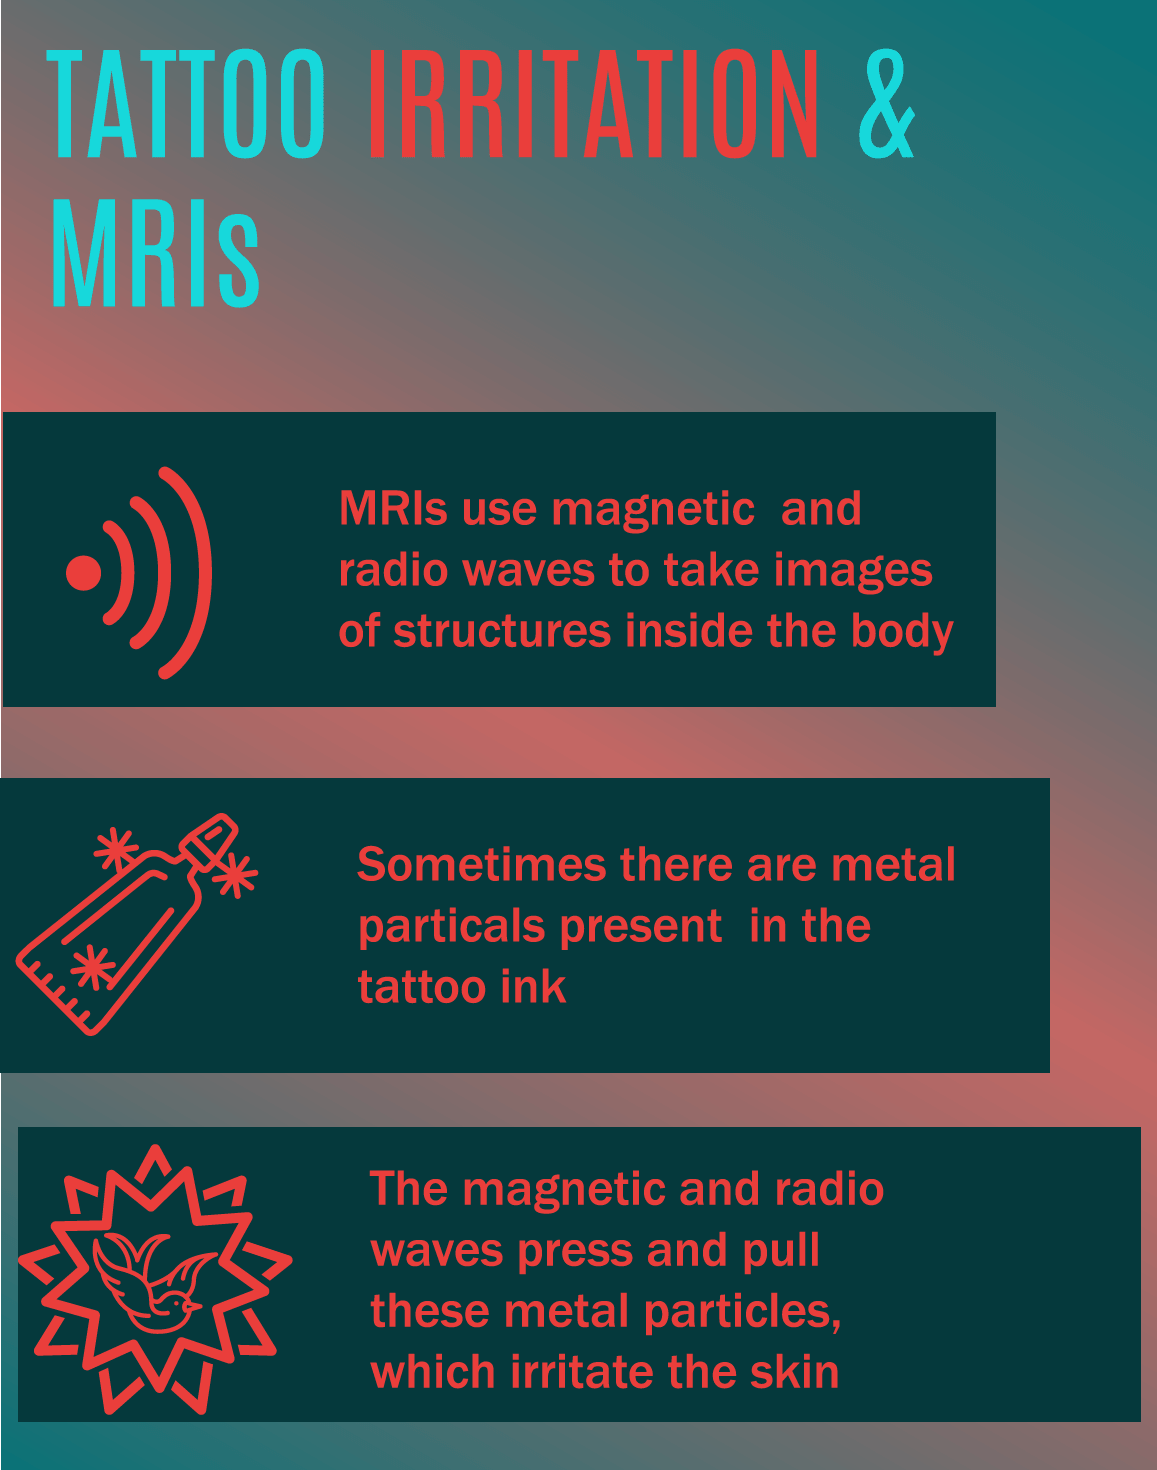 An infographic about tattoo irritation with MRIs